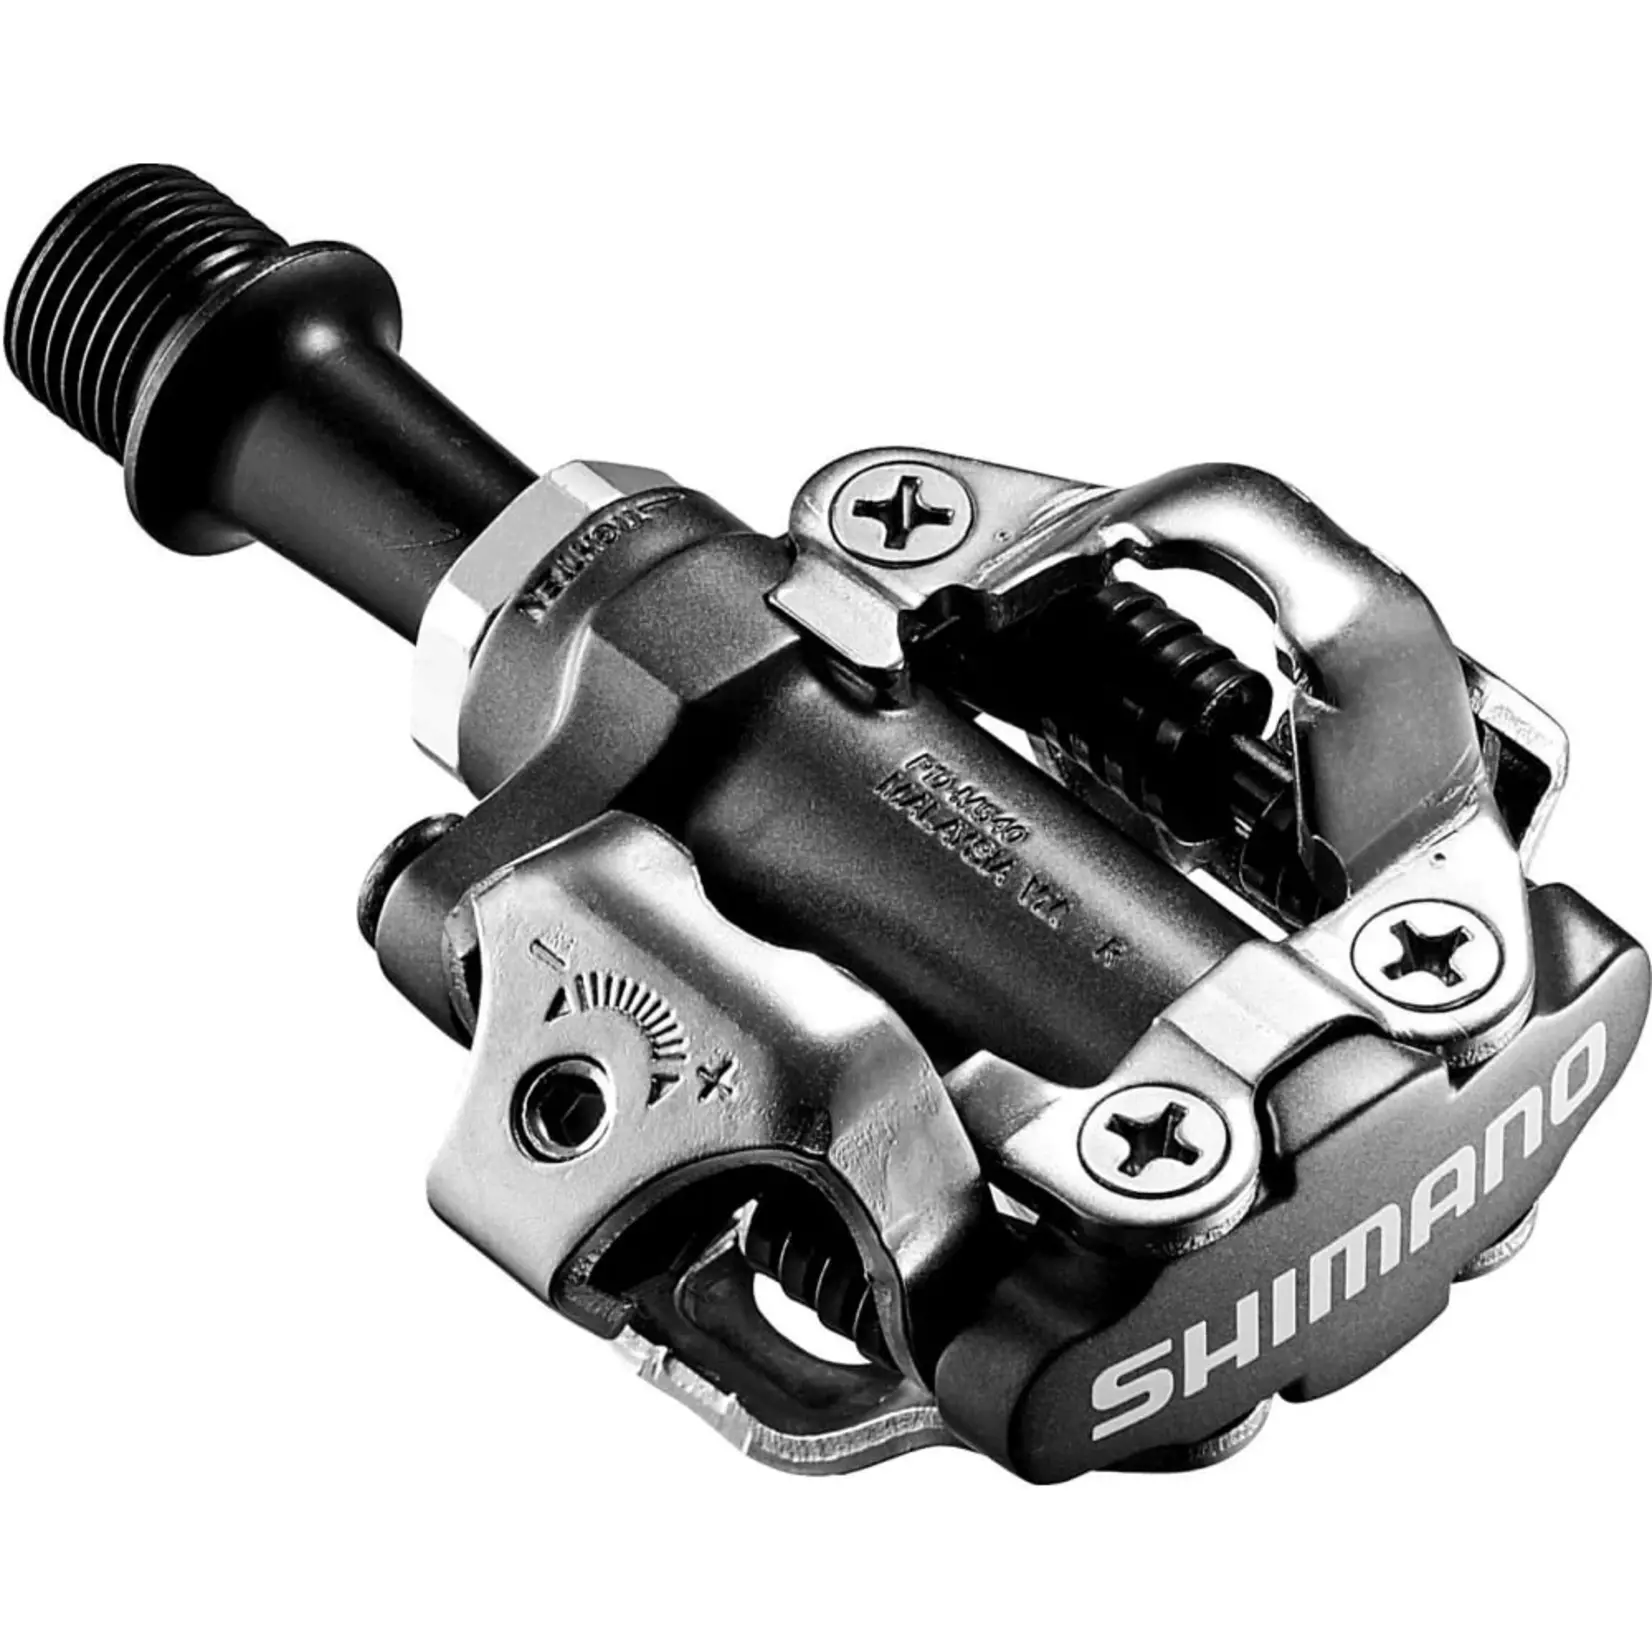 Shimano Pedals Shimano PD-M540 MTB SPD pedals - two sided mechanism, black